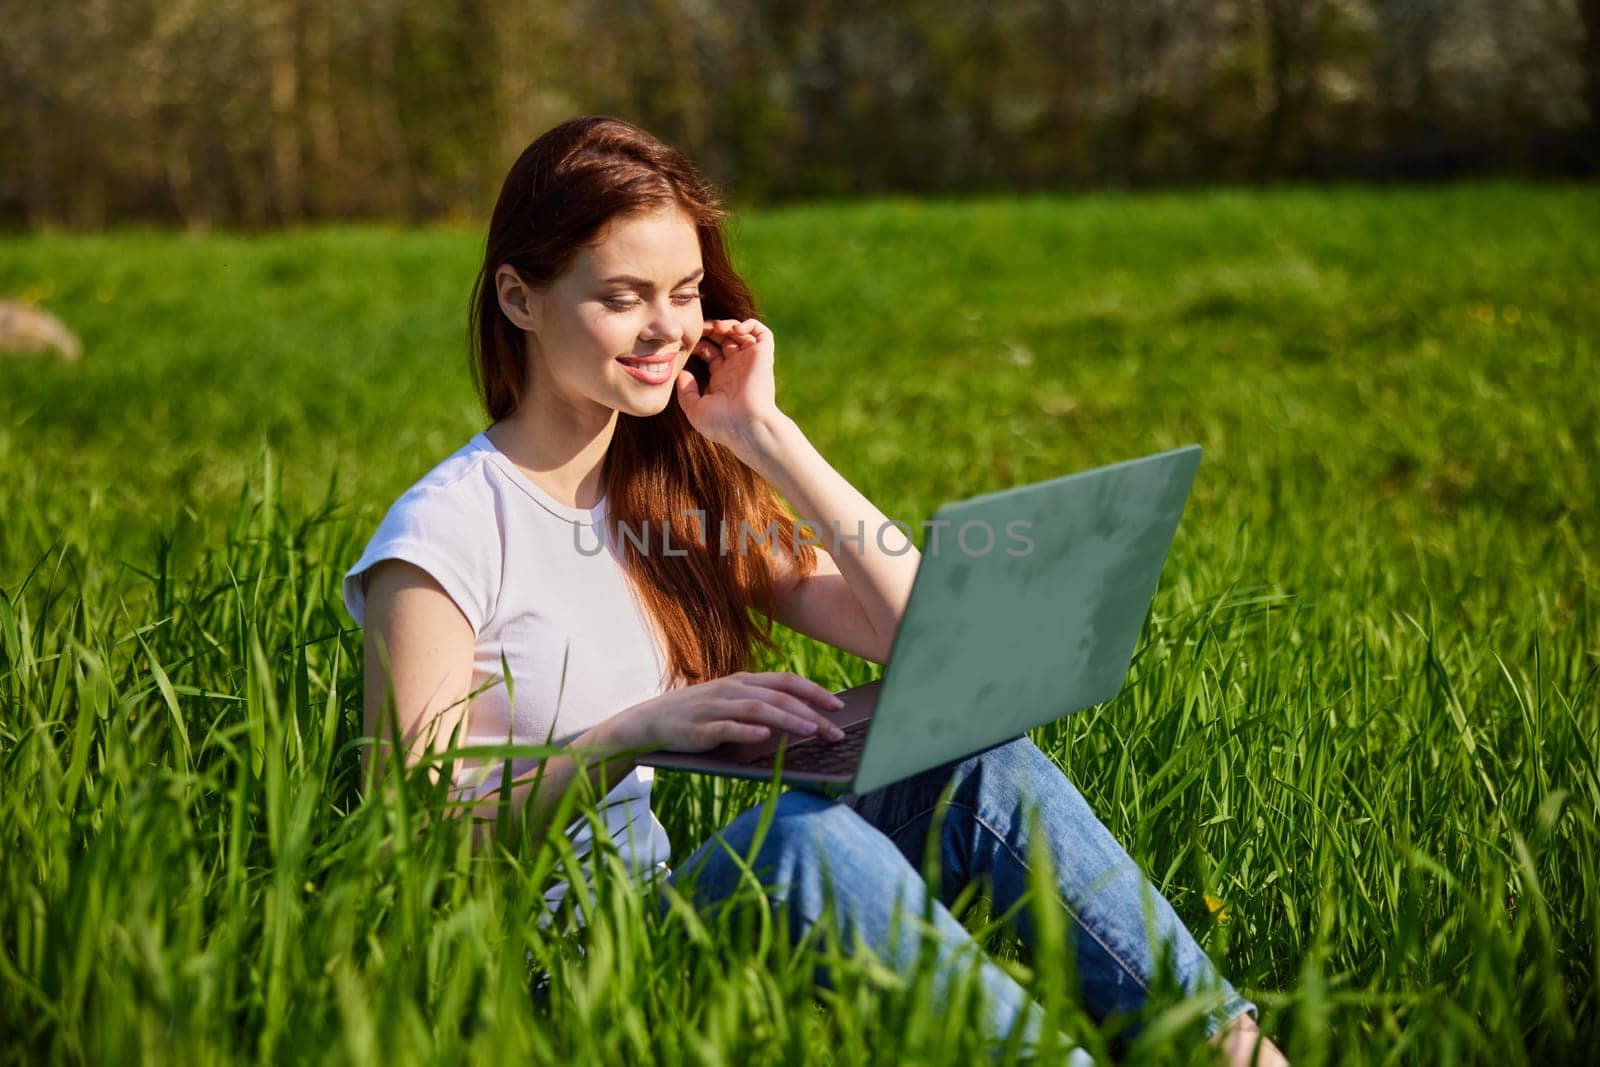 woman with laptop outdoors. High quality photo